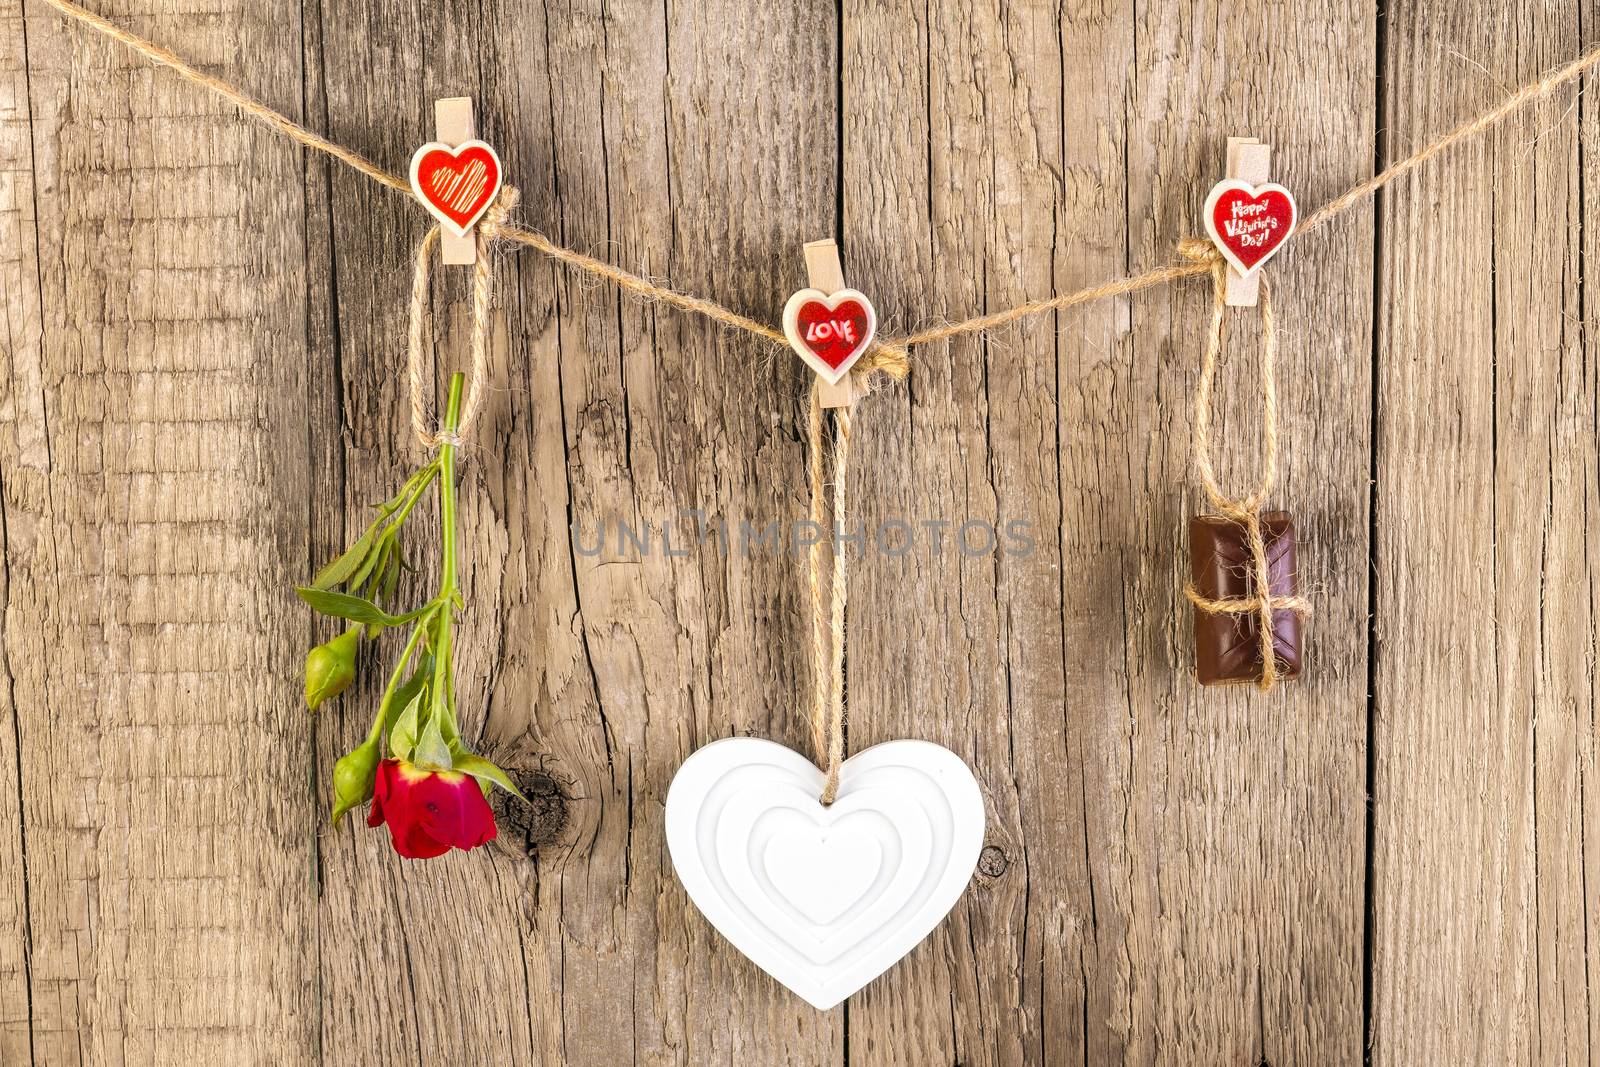 Red rose with white shape heart and chocolate on wooden background